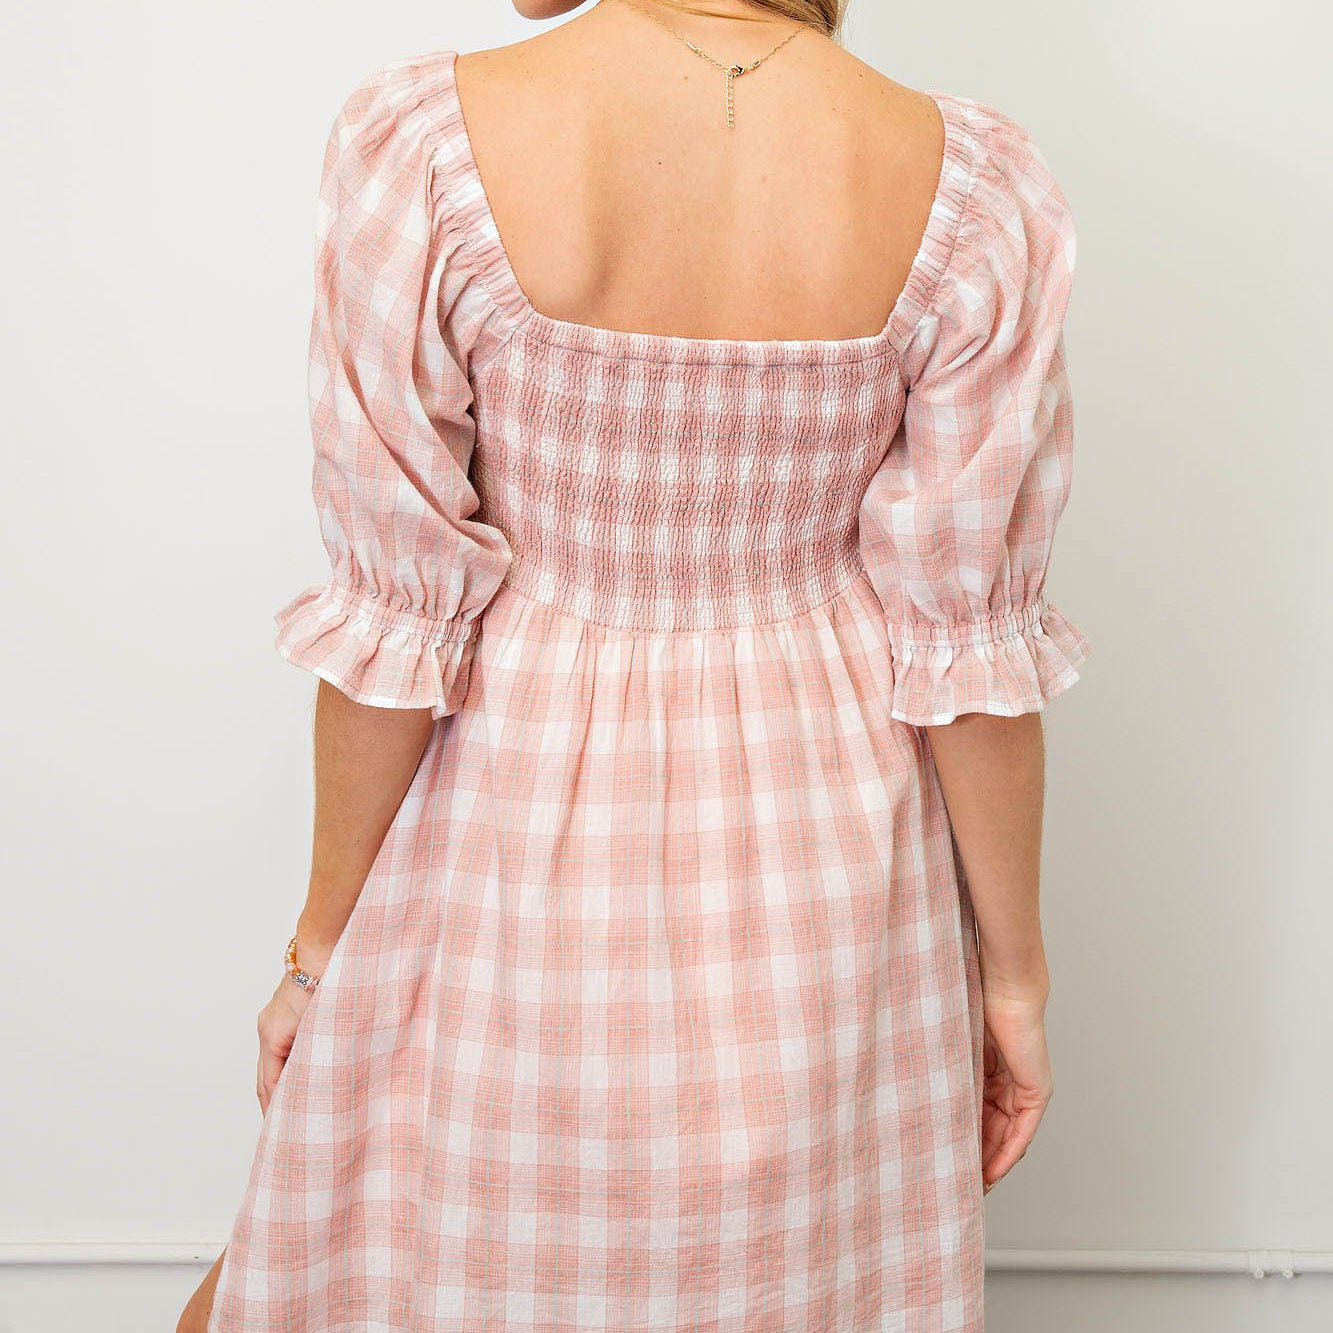 Blush Pink Plaid Dress with Bubble Sleeves